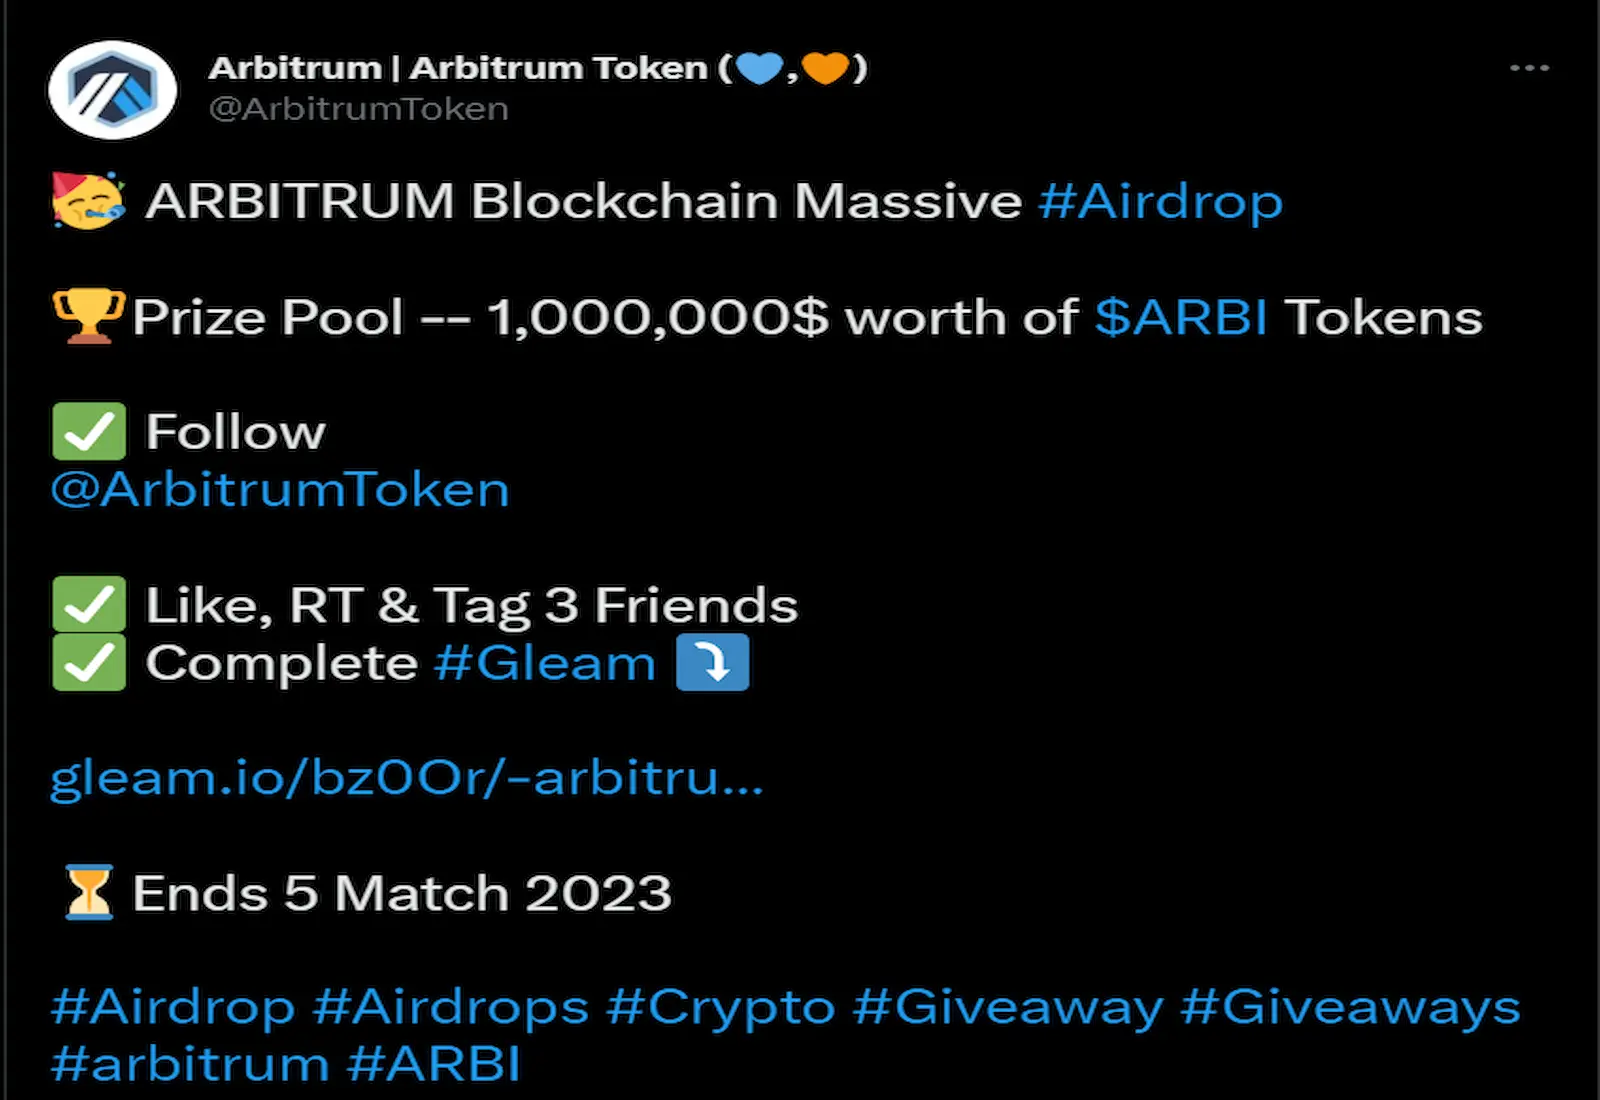 The Arbitrum airdrop announcement came from the seemingly official Arbitrum Twitter handle.